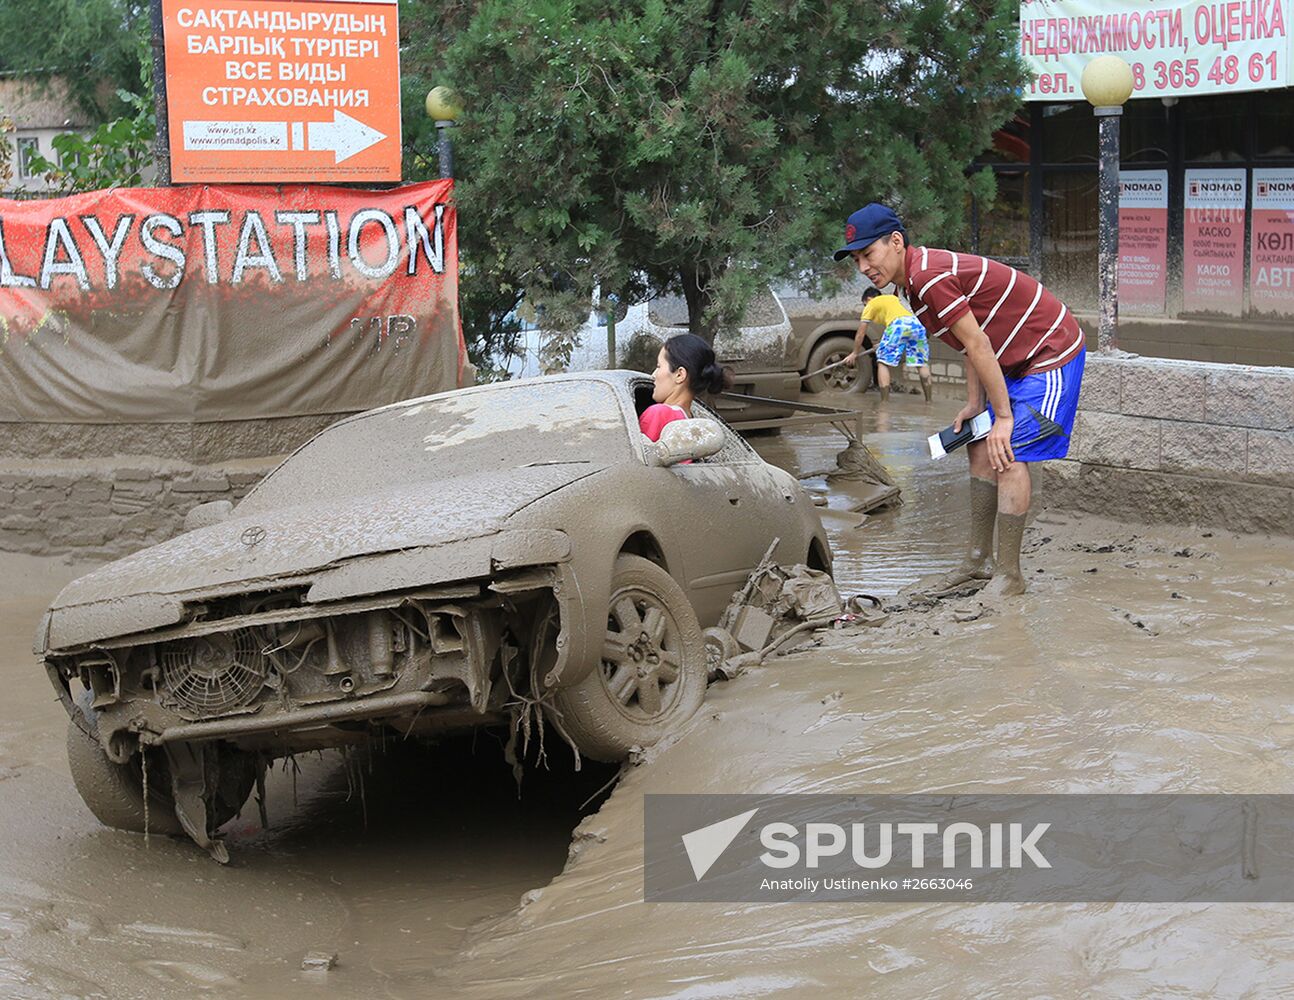 Aftermath of mud-and-stone landsclide in Kazakhstan's major city of Alma-Ata